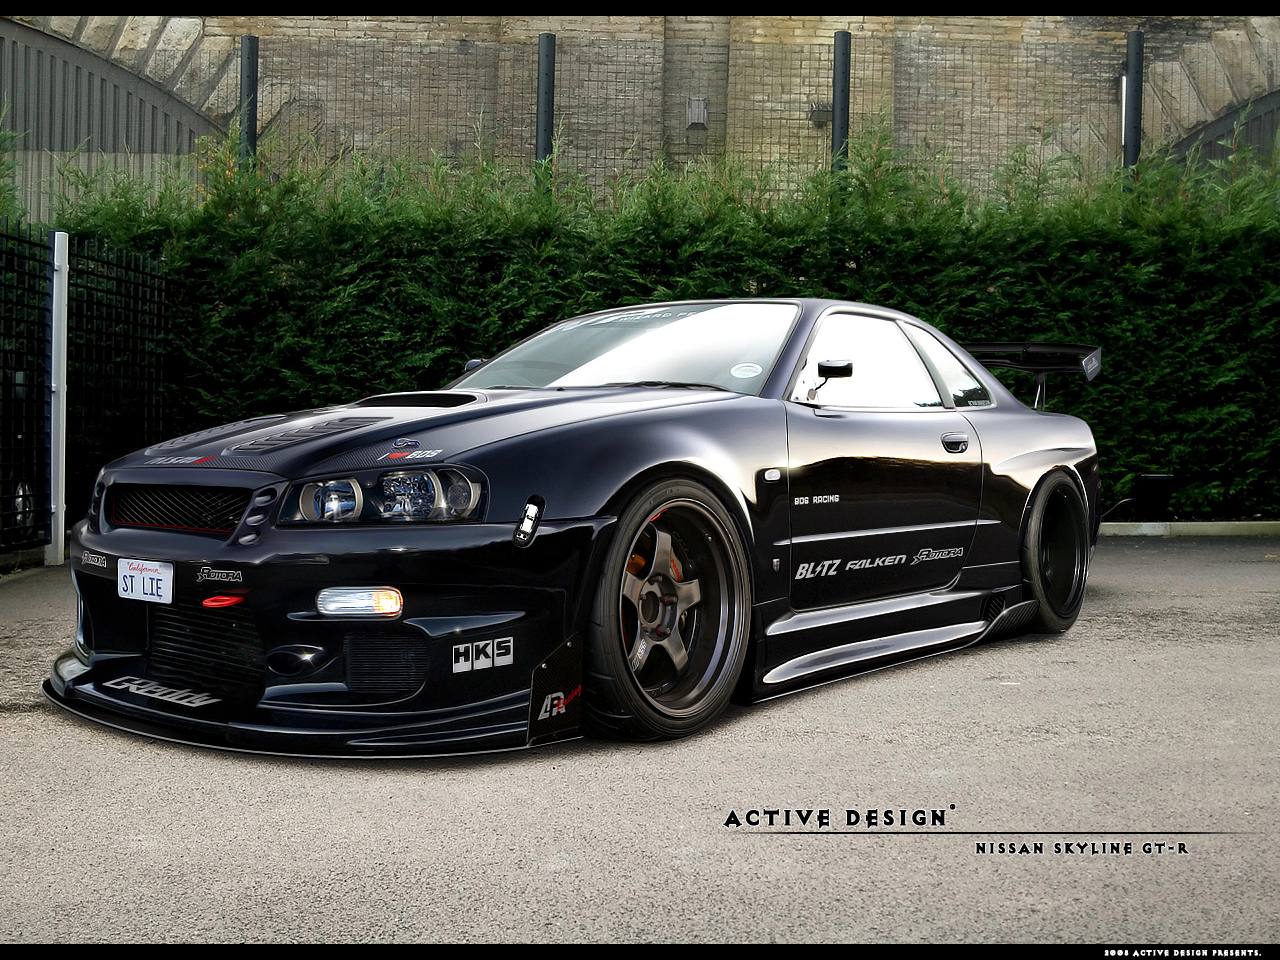 Picture of nissan skyline r34 #1